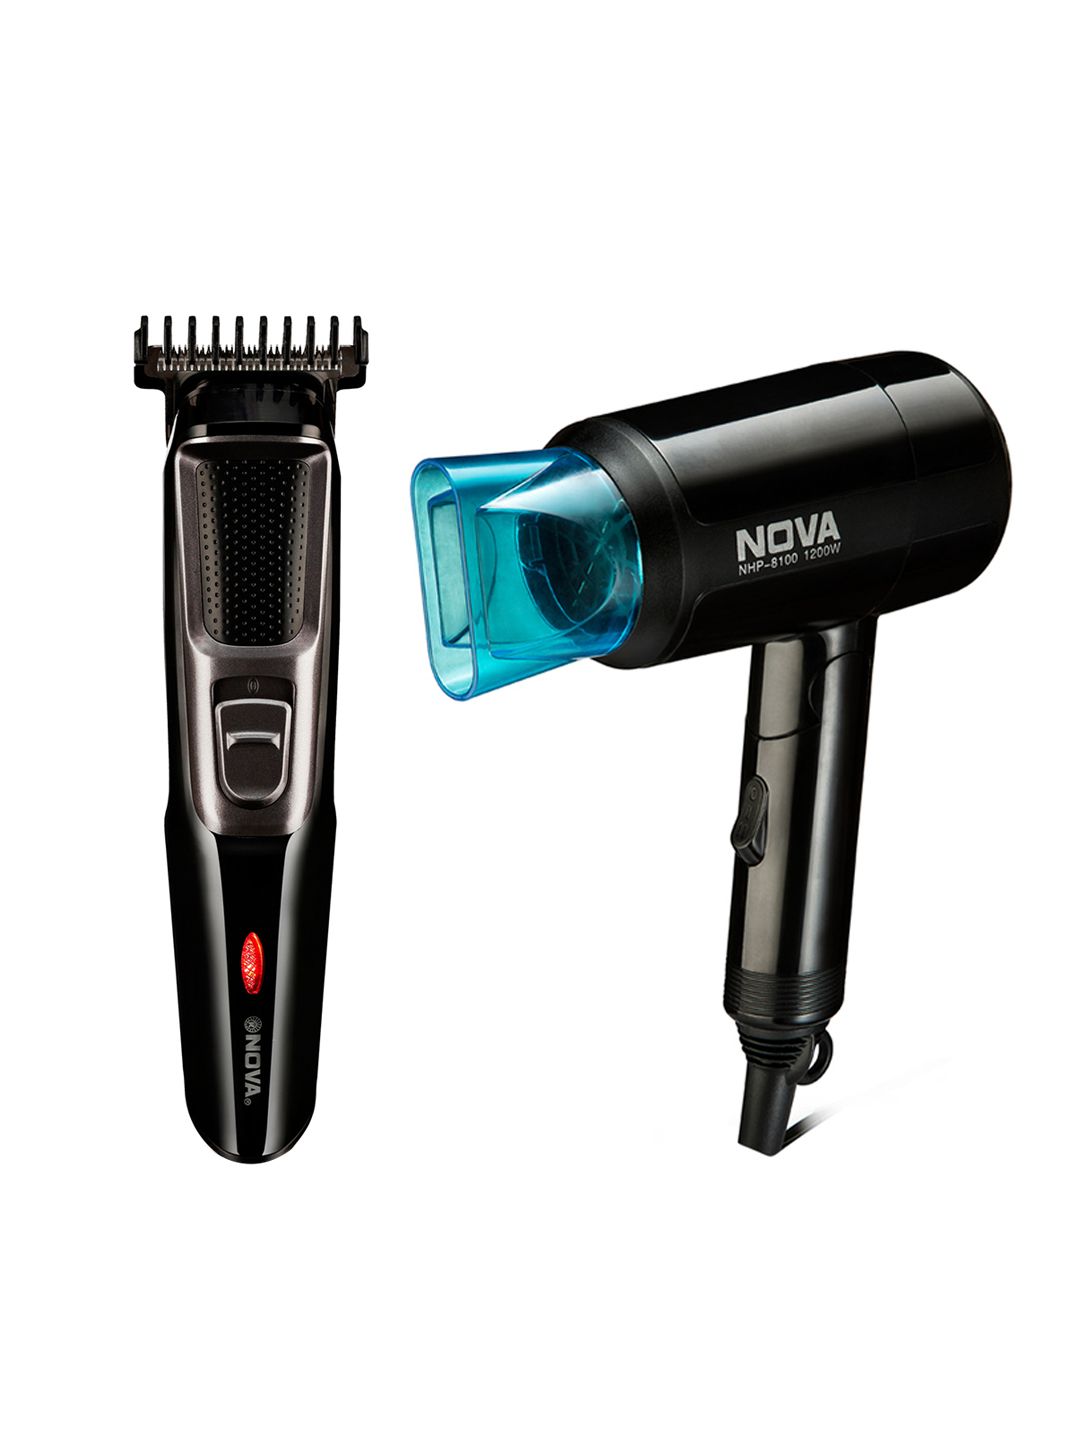 Nova Men NHT-1076 Cordless Trimmer & NHP 8105 Silky Shine Hot & Cold Foldable Hair Dryer Price in India